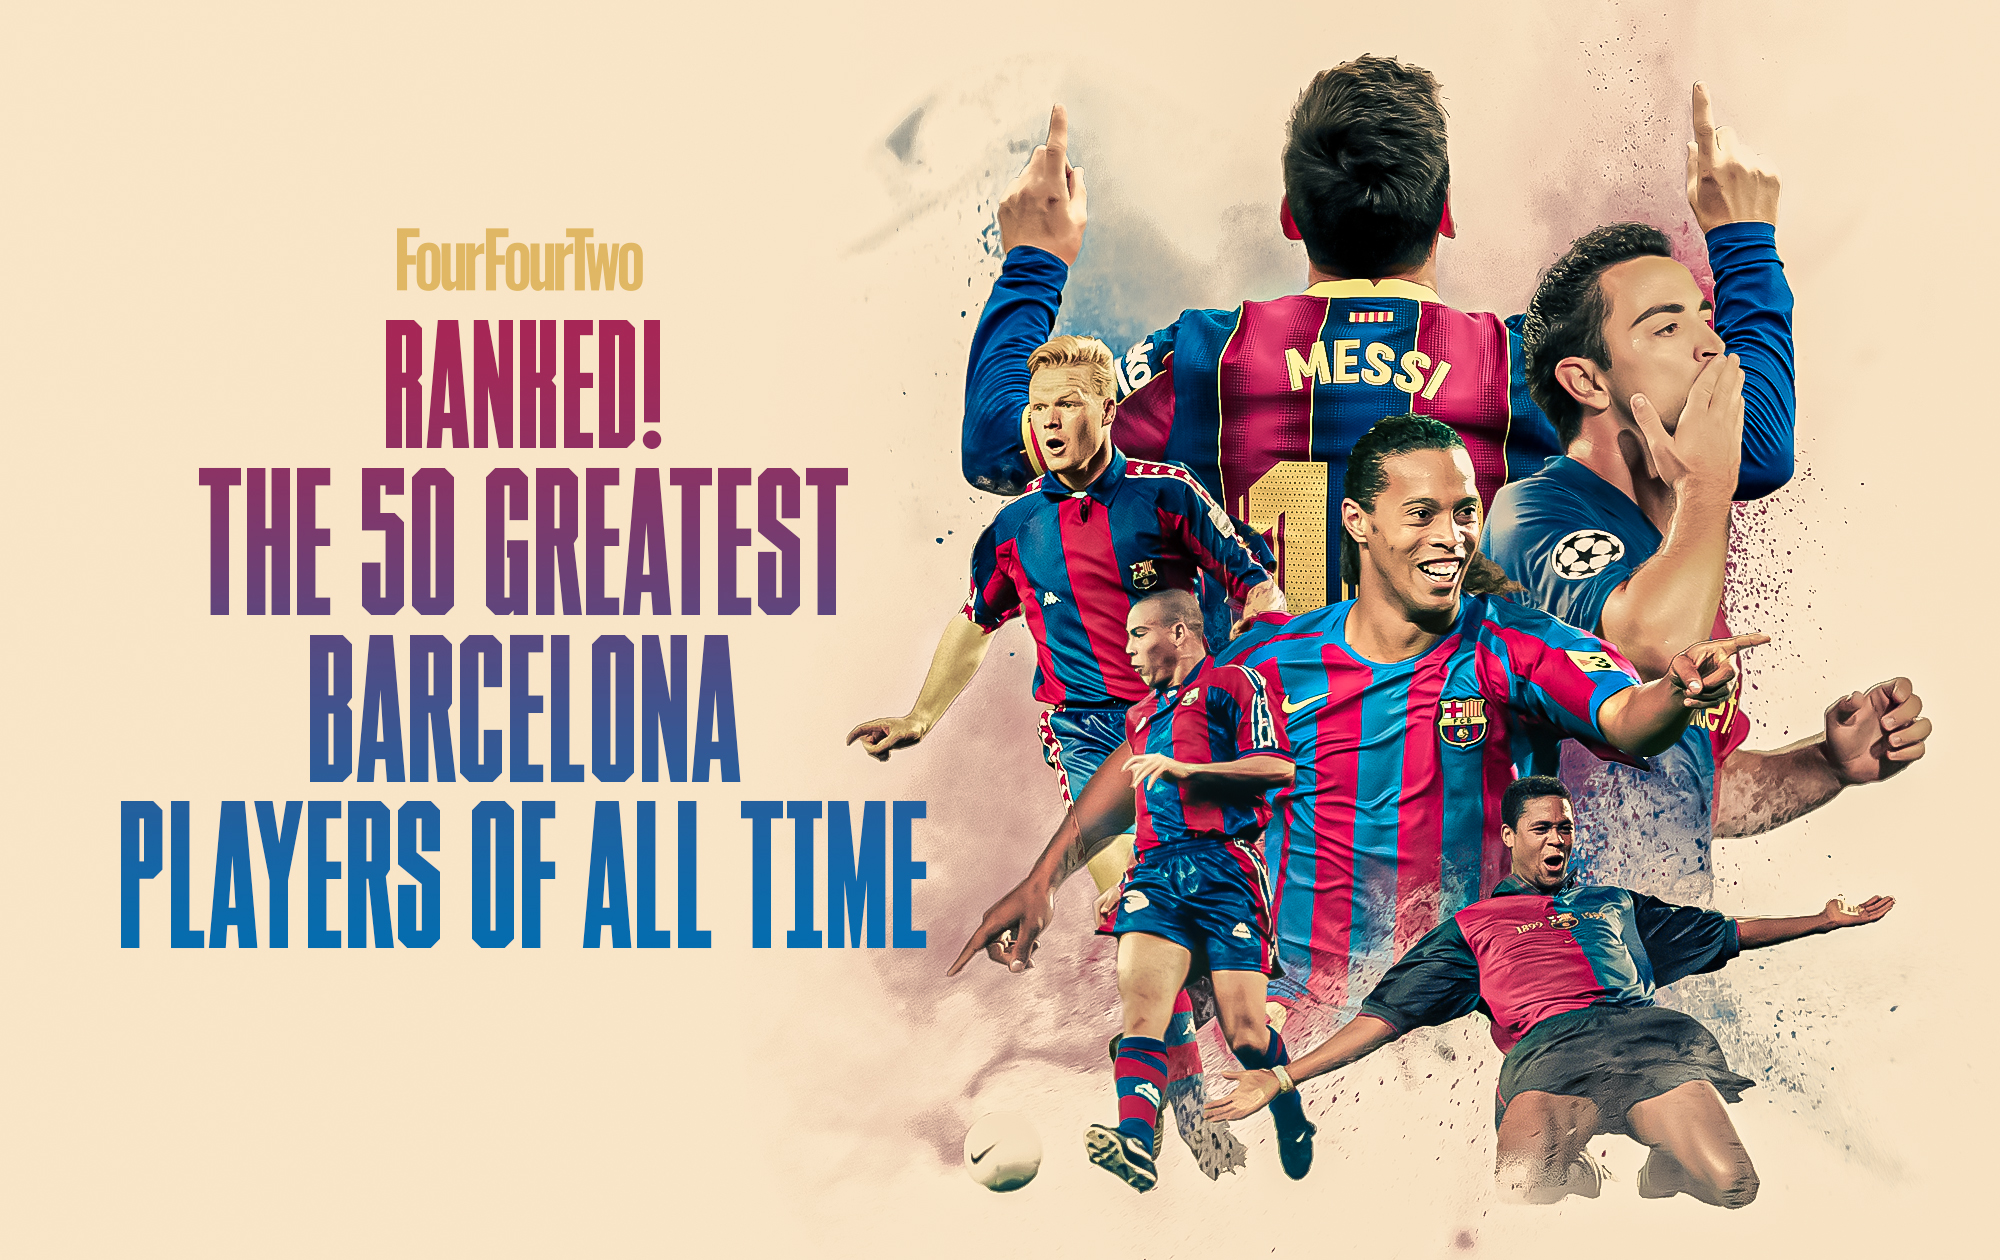 fodbold regnskyl Tumult Ranked! The 50 greatest Barcelona players of all time | FourFourTwo